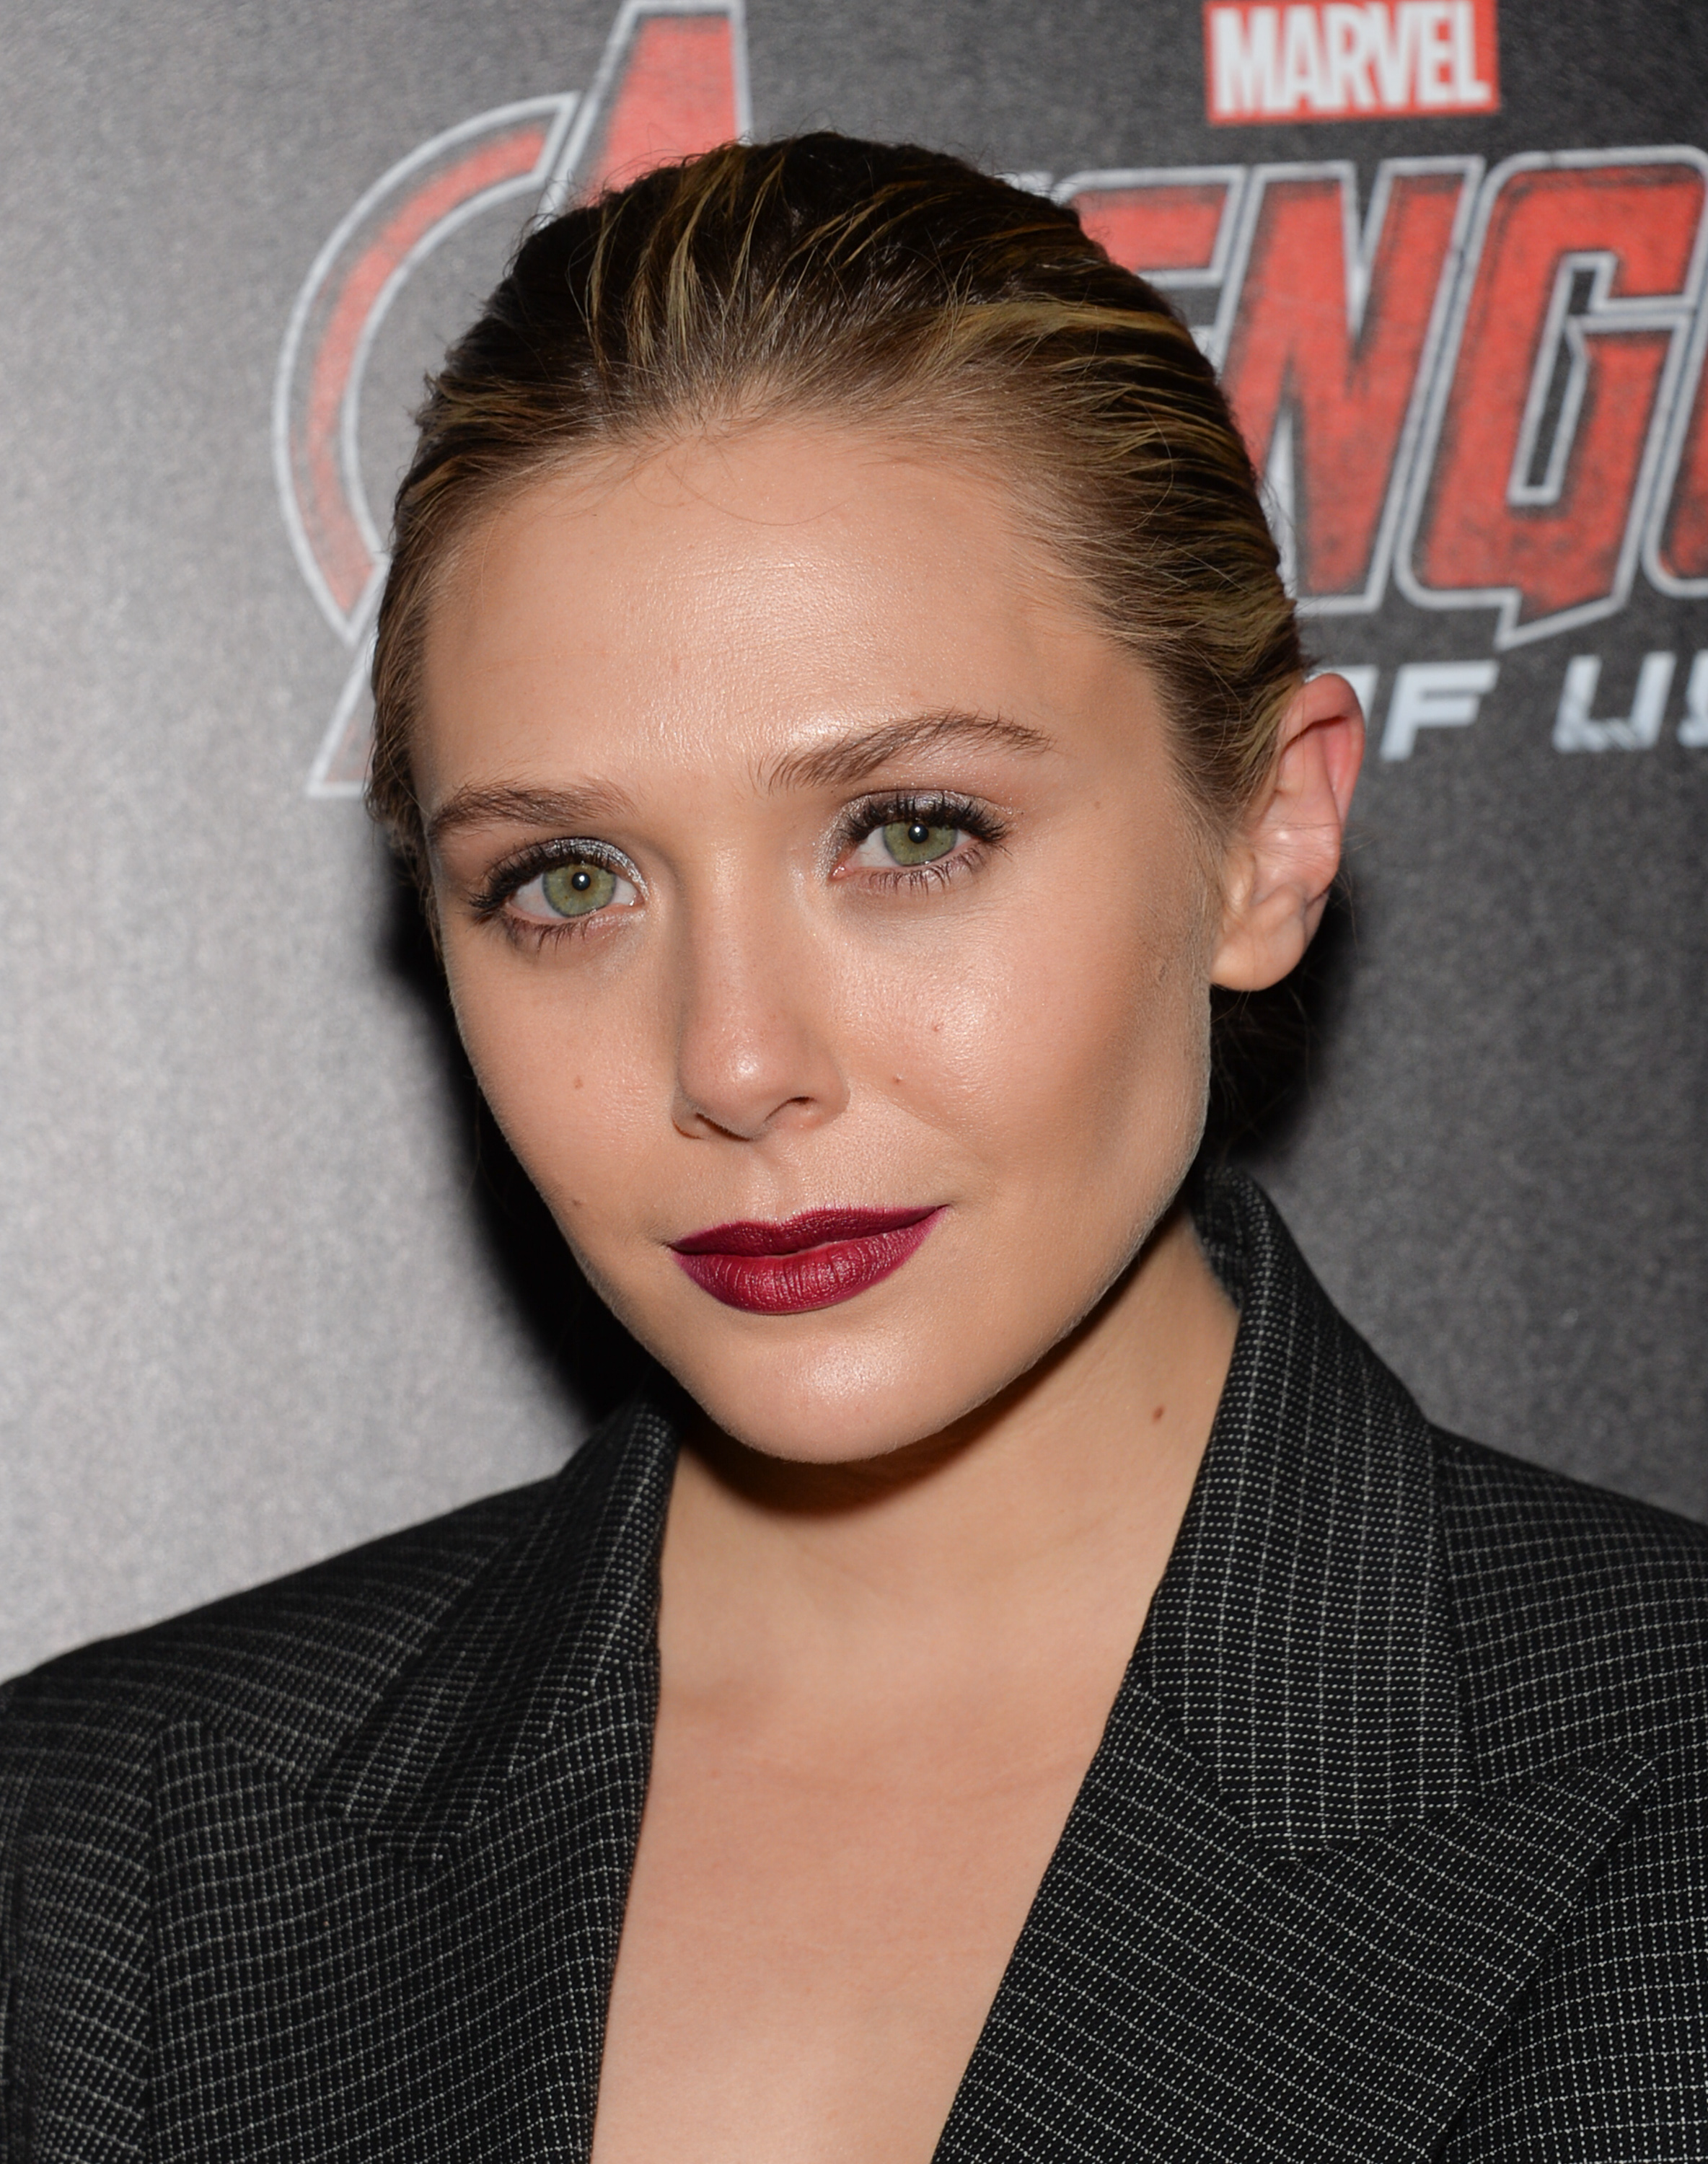 Actress Elizabeth Olsen attends a special screening of Marvel's "Avengers: Age of Ultron" in New York City on April, 28, 2015.